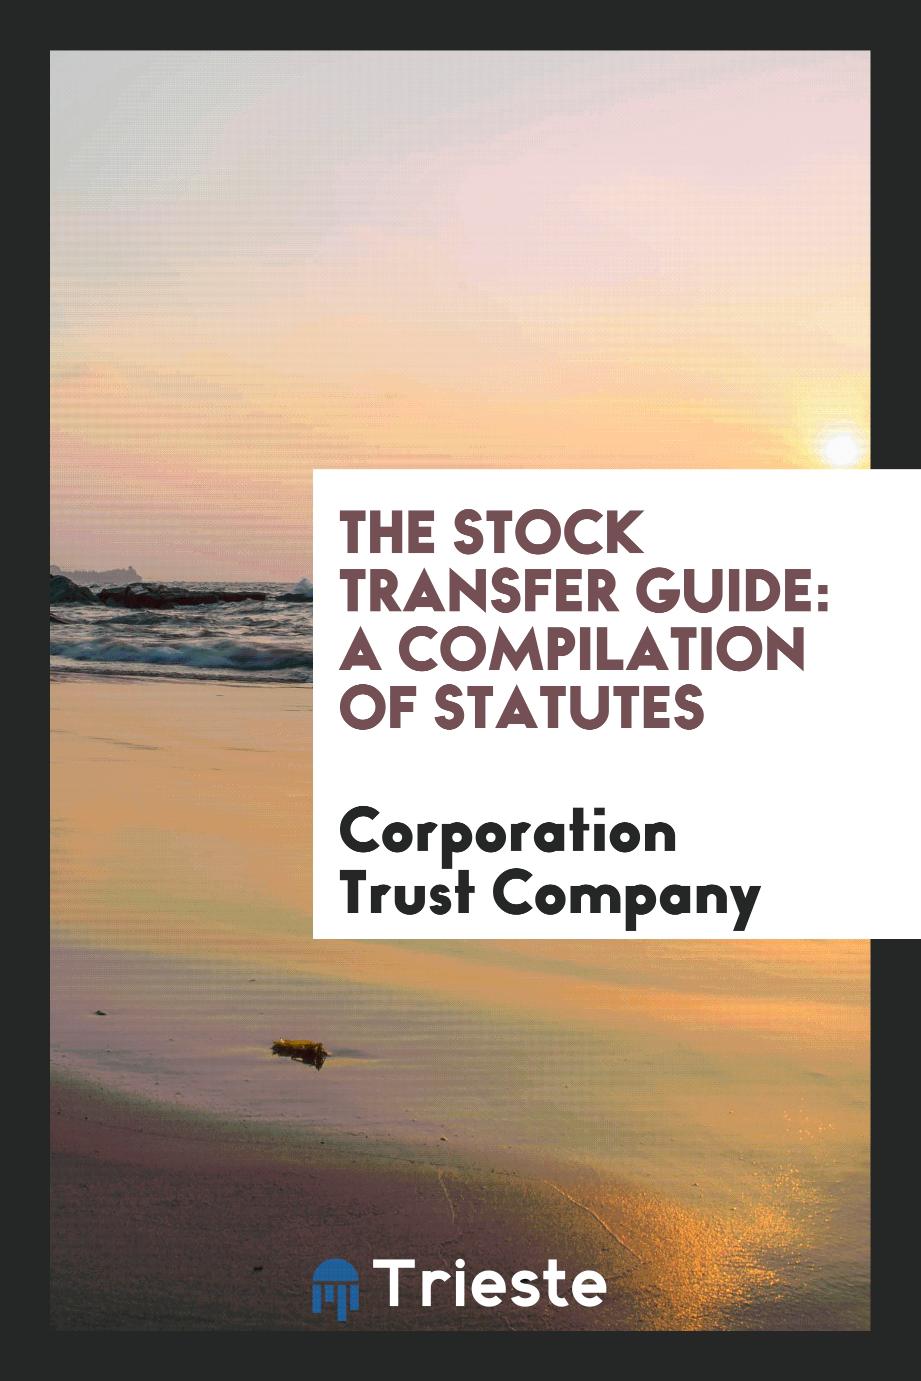 The Stock Transfer Guide: A Compilation of Statutes